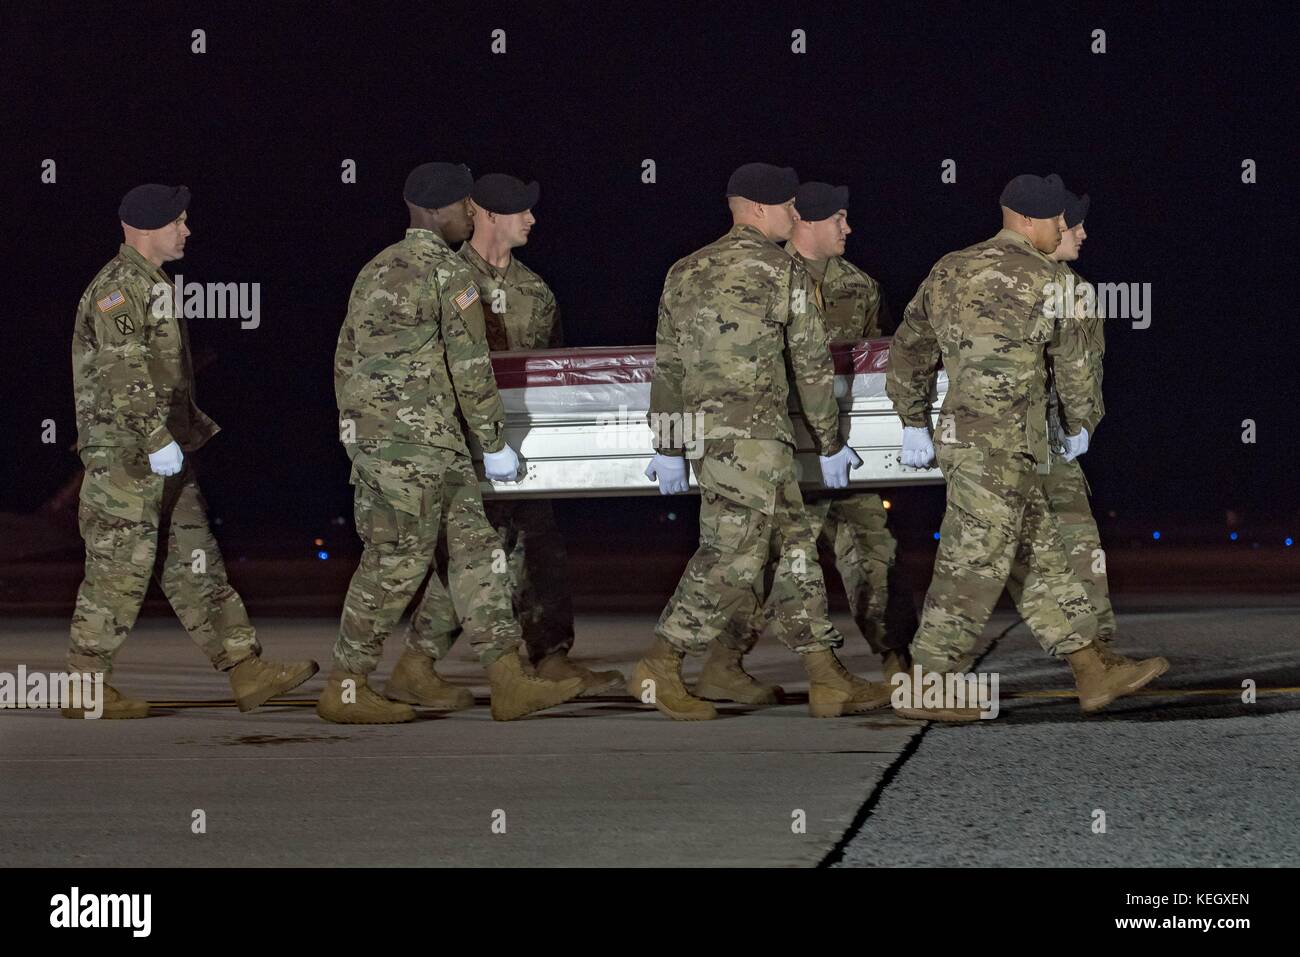 U.S. Soldiers from the 3rd Infantry Regiment carry the flag draped casket of Staff Sgt. Dustin M. Wright, of Lyons, Georgia during a Dignified Transfer at Dover Air Force Base, October 5, 2017 in Dover, Delaware. Wright, a member of the special forces, was killed in action on October 4 in Niger, Africa. Stock Photo